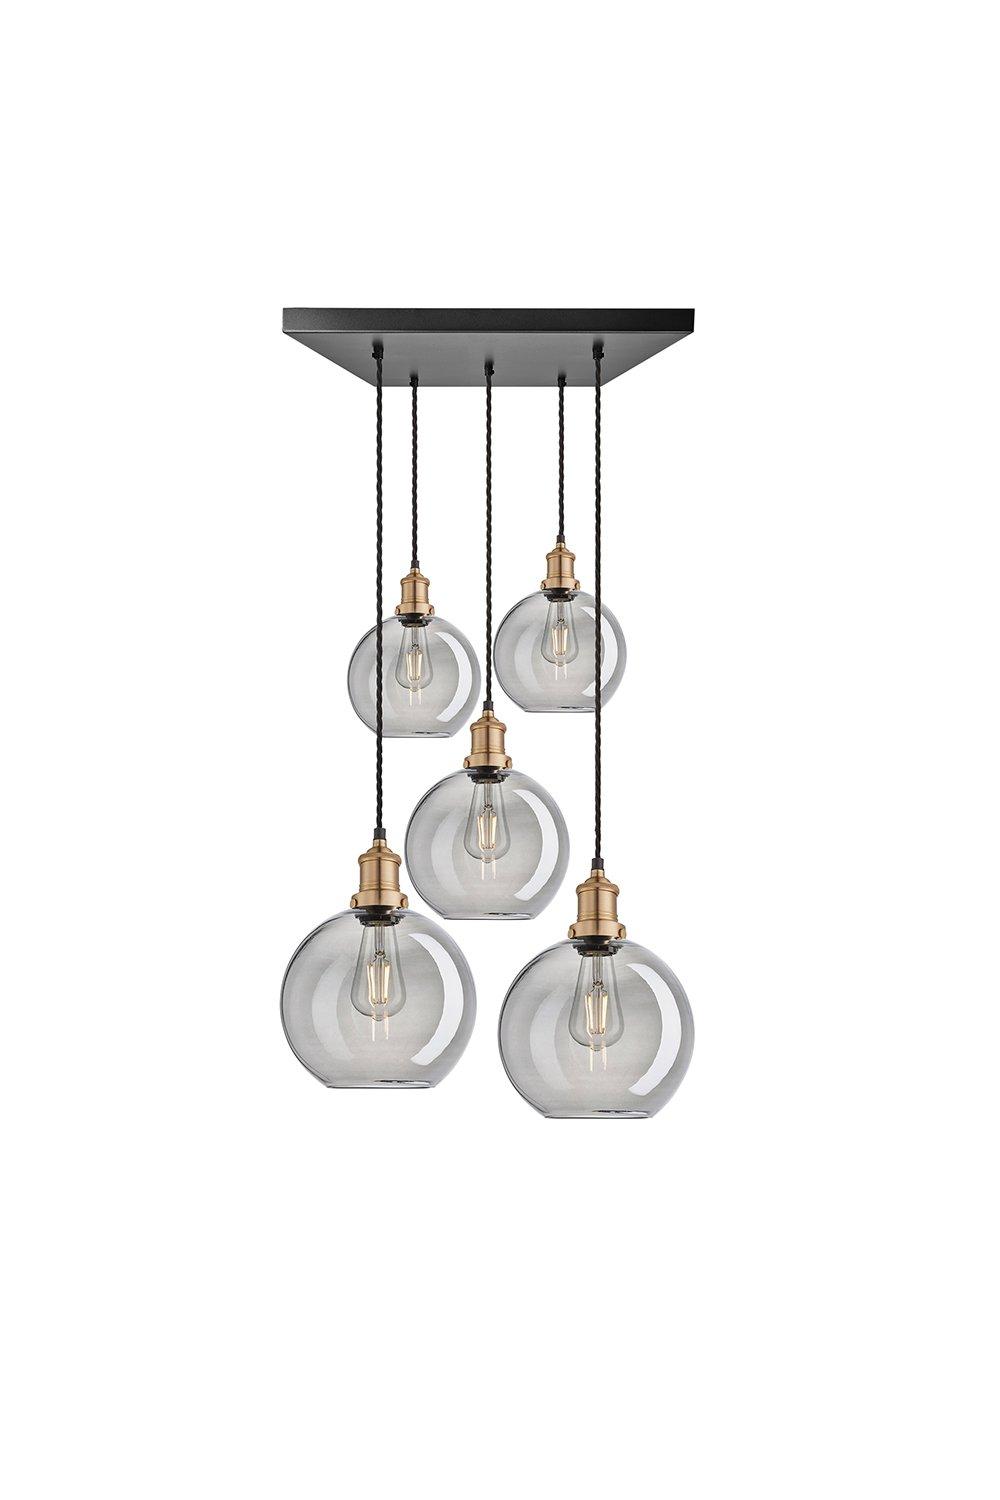 Brooklyn Tinted Glass Globe 5 Wire Square Cluster Lights, 9 inch, Smoke Grey, Brass holder